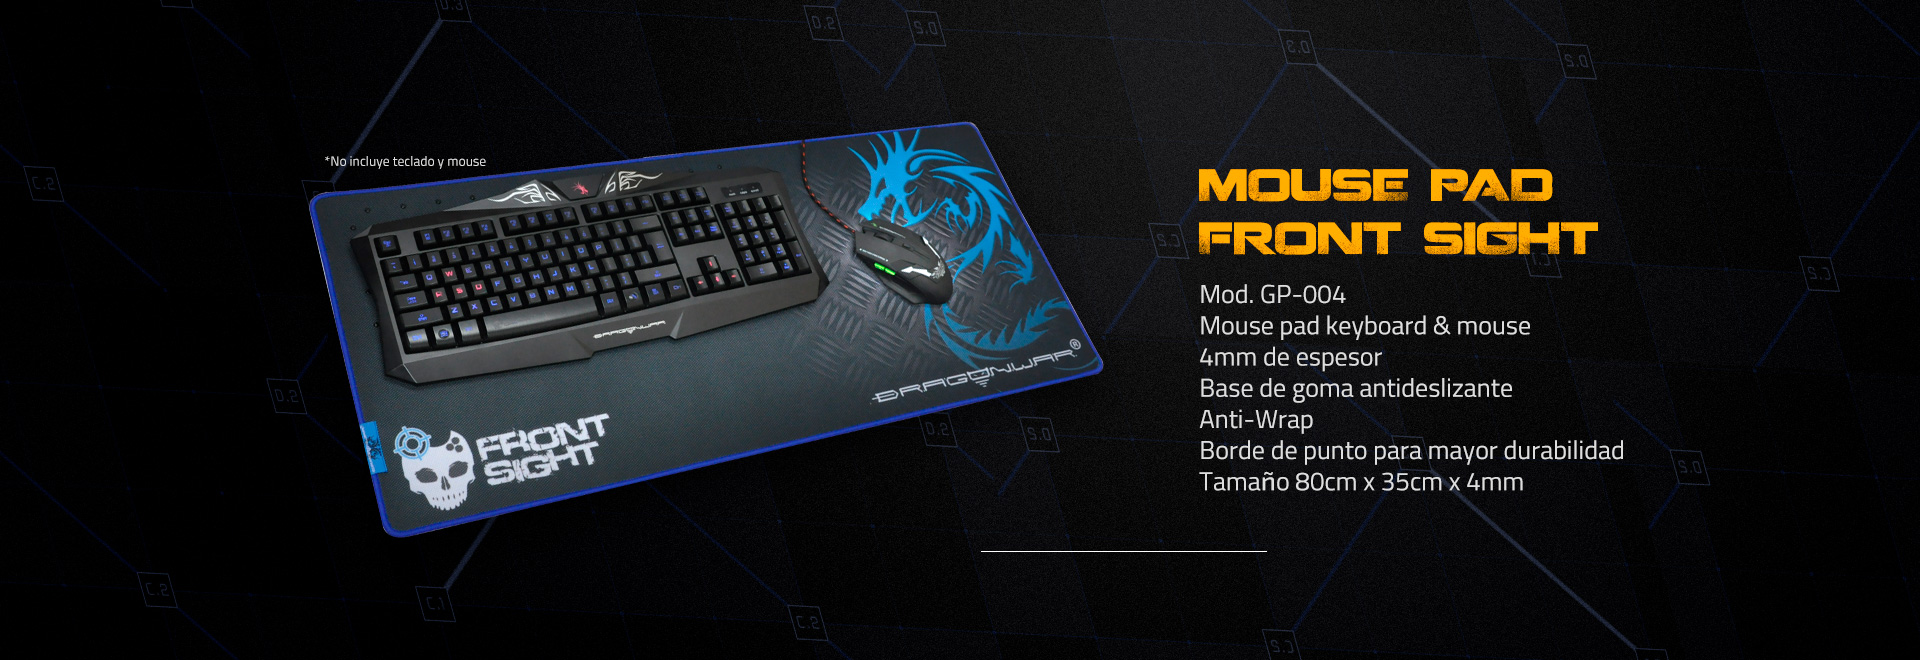 Mouse Pad Front Sight - Flyer: 0